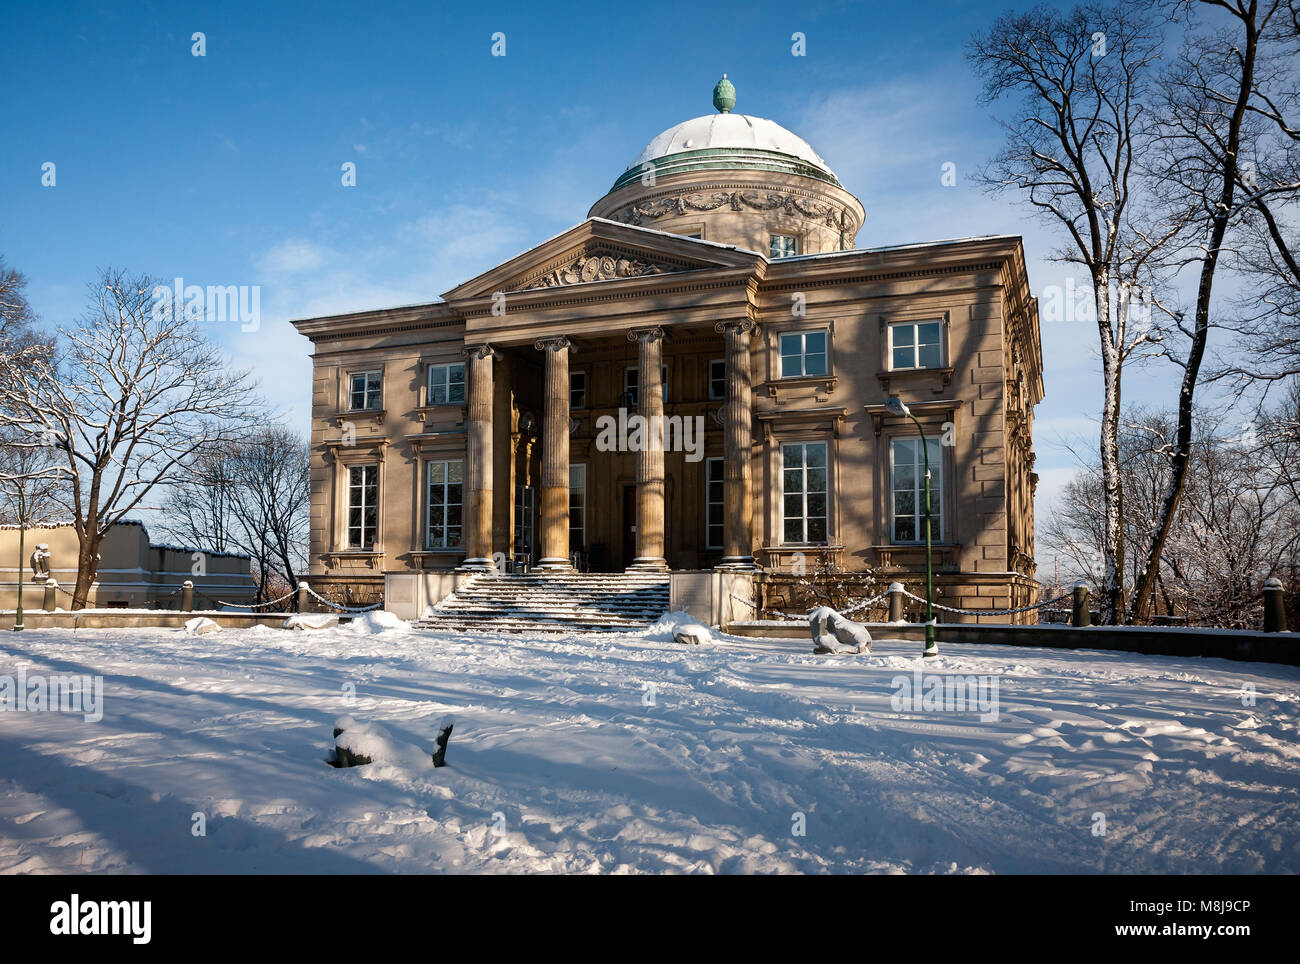 WARSAW, POLAND - JANUARY 16, 2016: Królikarnia / The Rabbit House in Warsaw, Poland is also a museum dedicated to sculptor artist Xawery Dunikowski Stock Photo